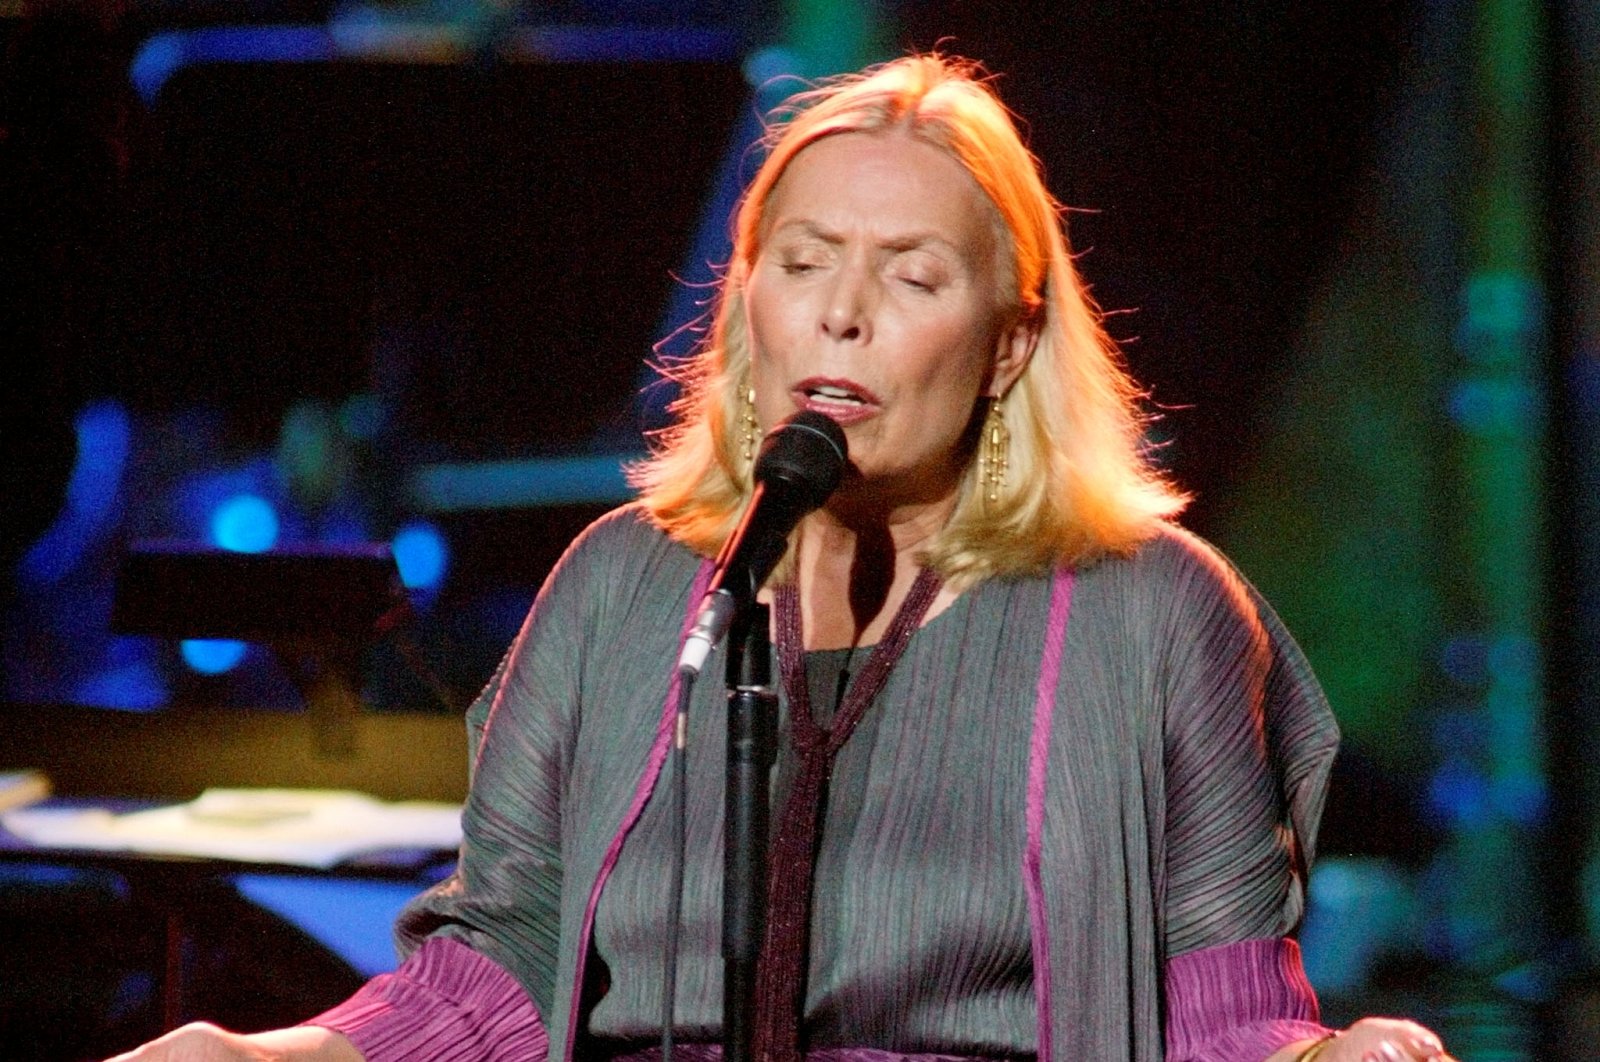 Singer Joni Mitchell performs during the "Stormy Weather" concert in Los Angeles, Calif., U.S., Nov. 14, 2002. (REUTERS)